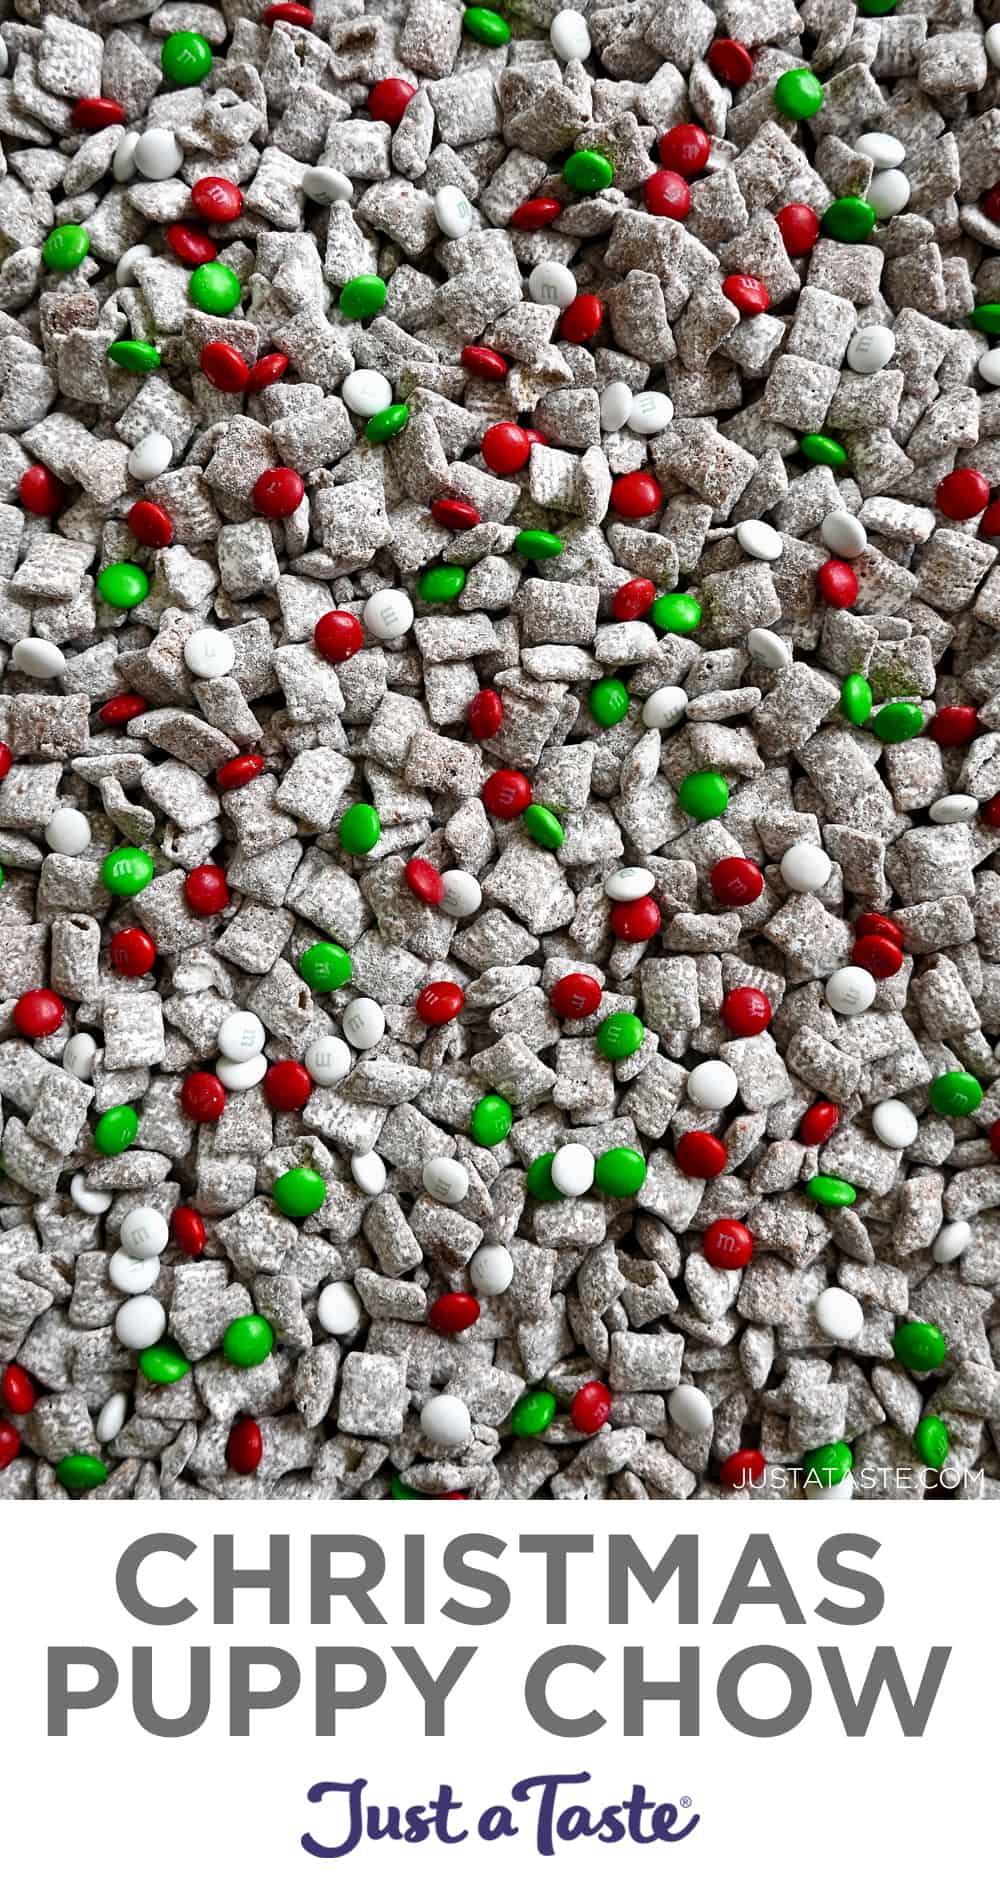 A top-down view of Christmas Puppy Chow featuring red, green and white M&Ms.